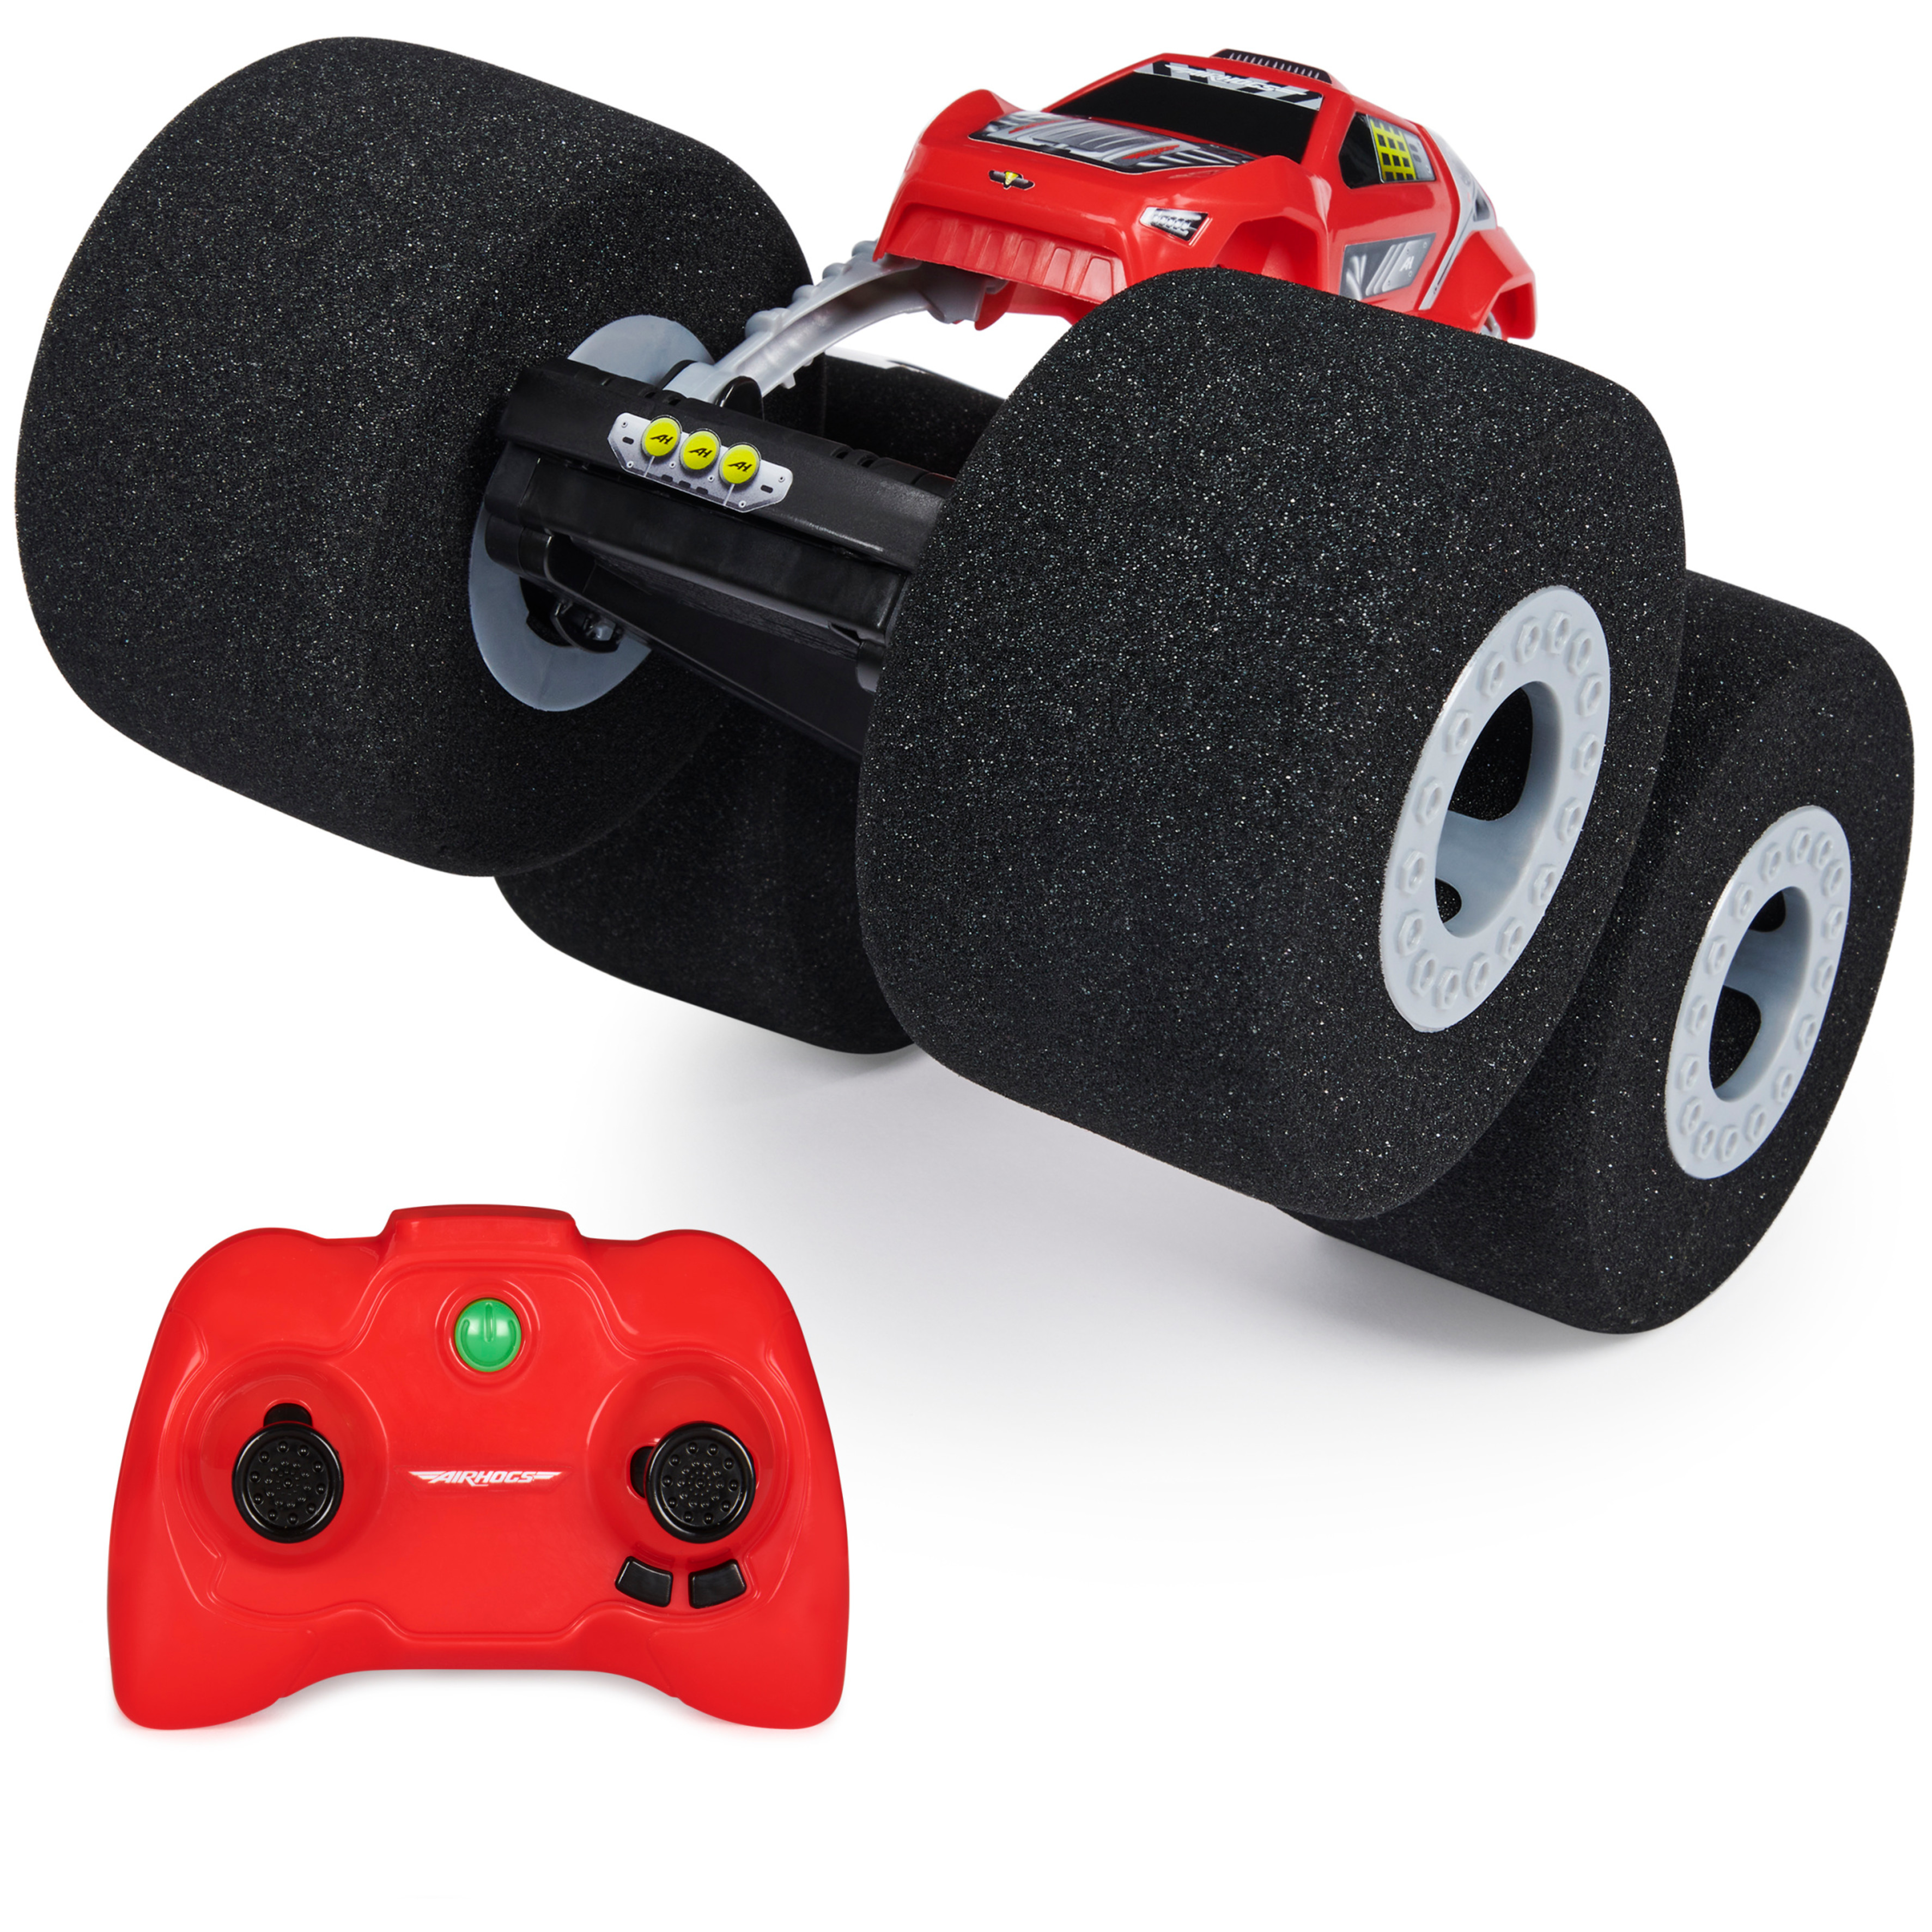 Air Hogs Super Soft, Stunt Shot Indoor Remote Control Stunt Vehicle with Soft Wheels, for Kids Aged 5 and up - image 1 of 10